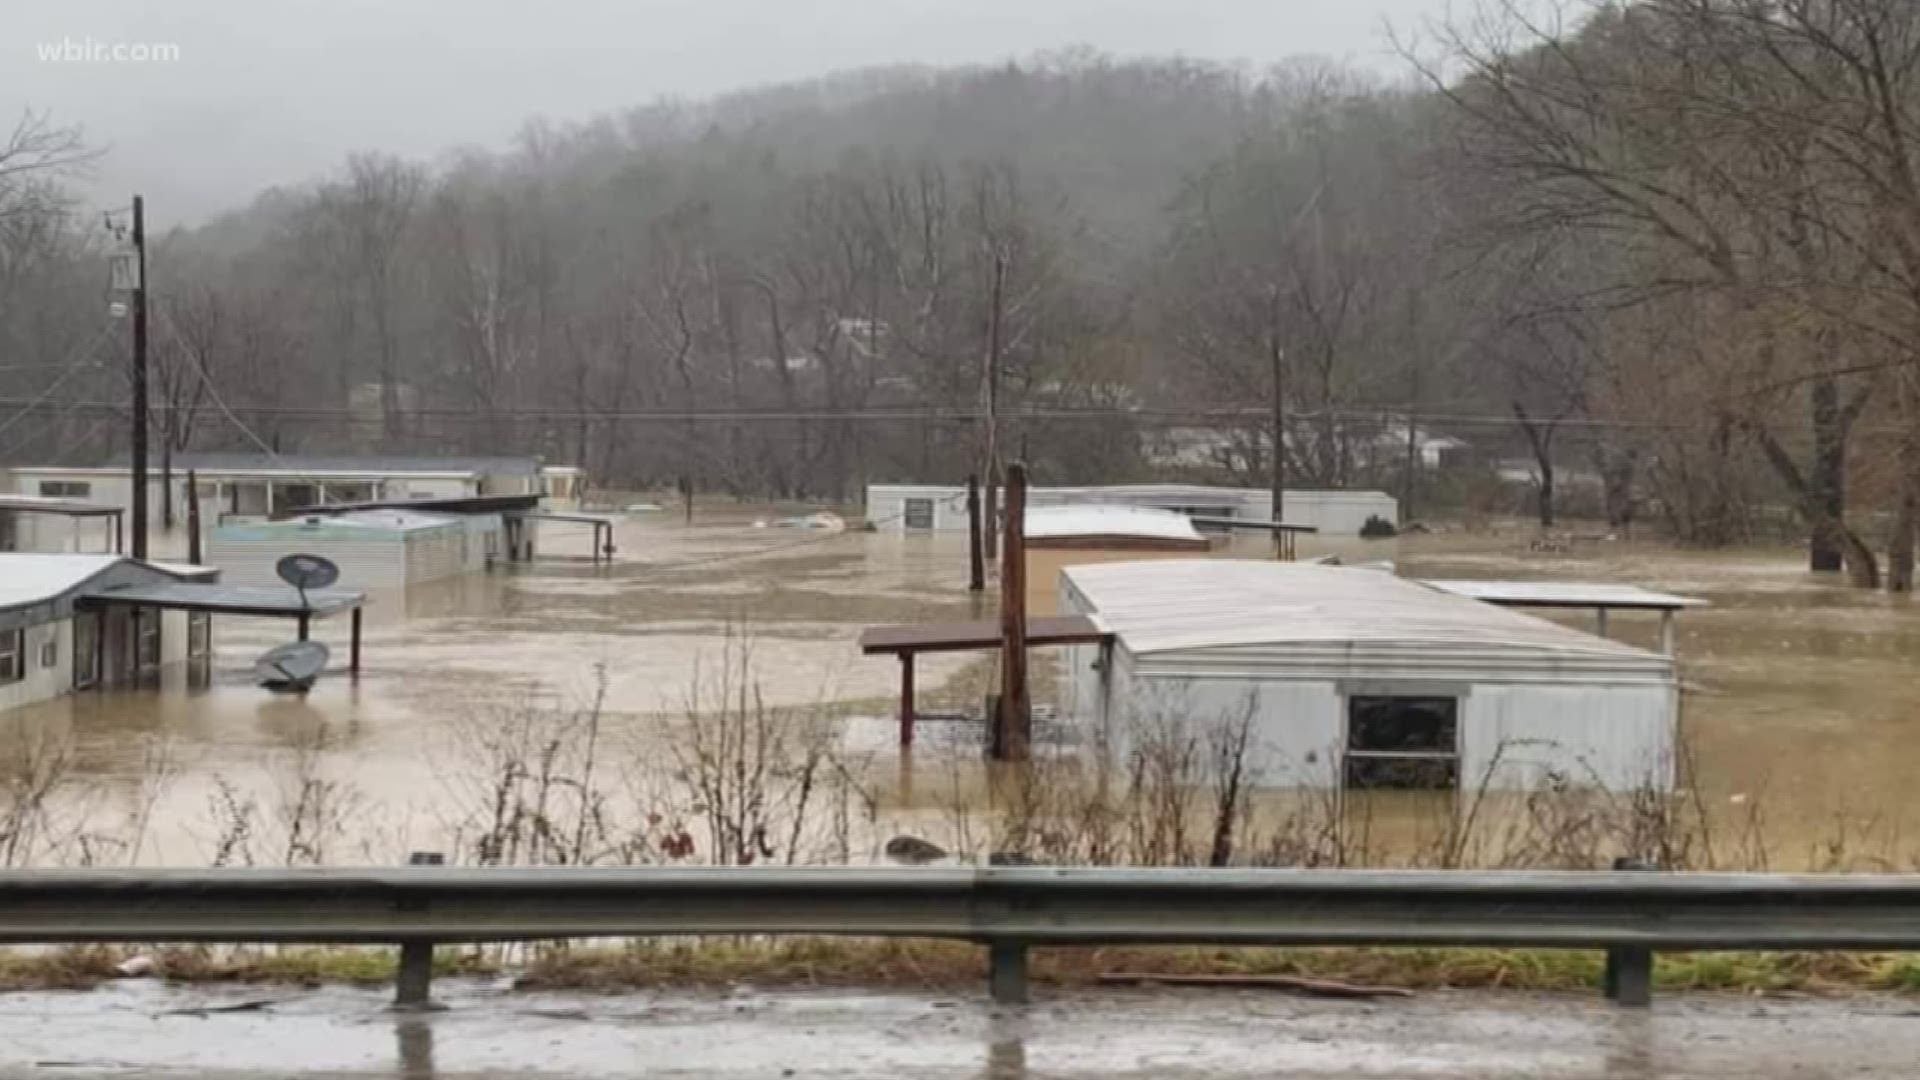 Gov. Beshear declares state of emergency for SE Kentucky following